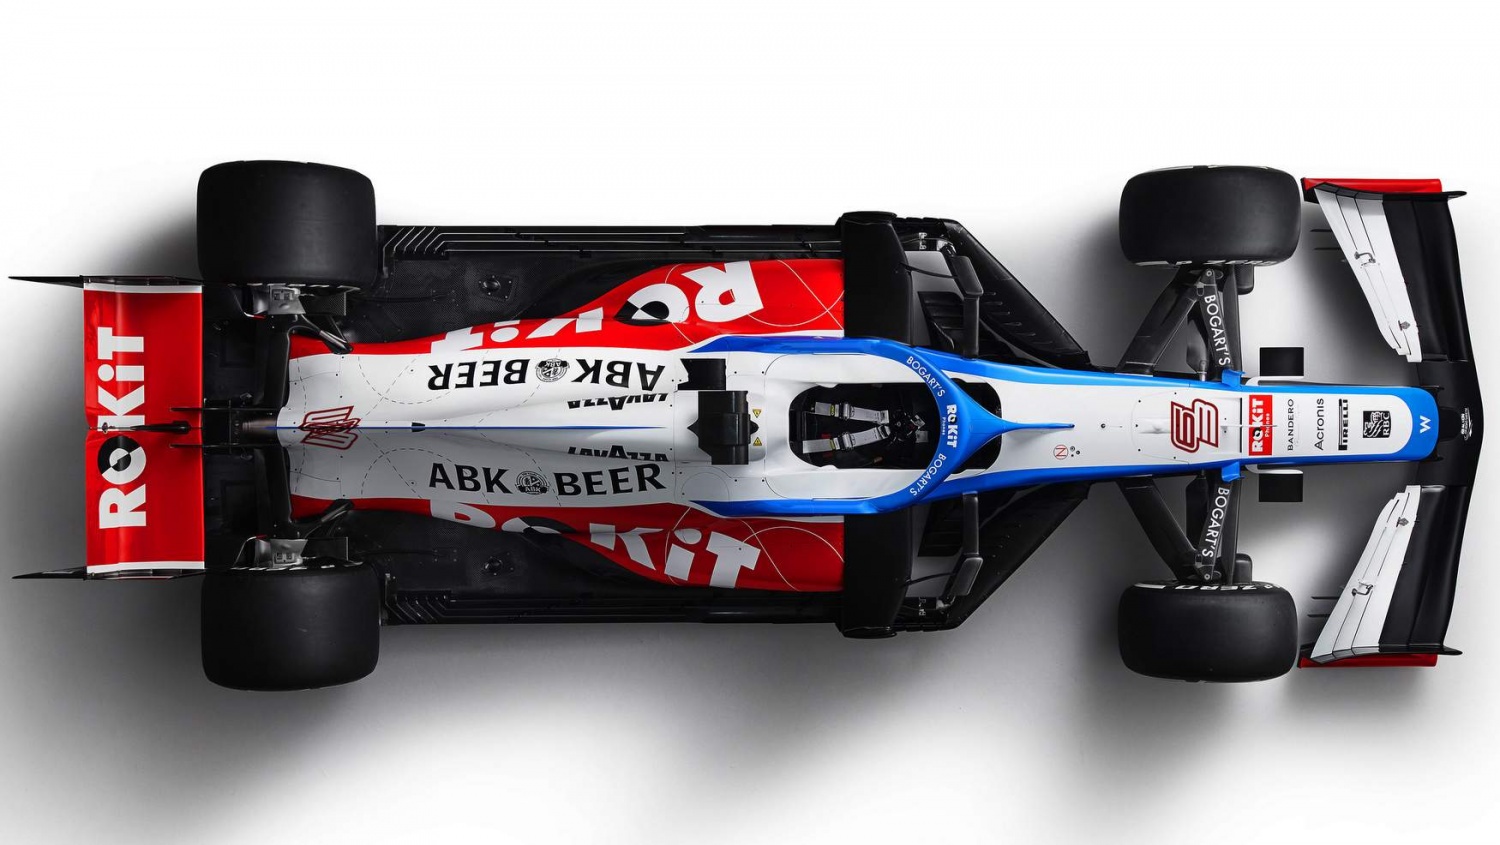 Will Williams’ new FW43 improve as much on track as it does in looks?